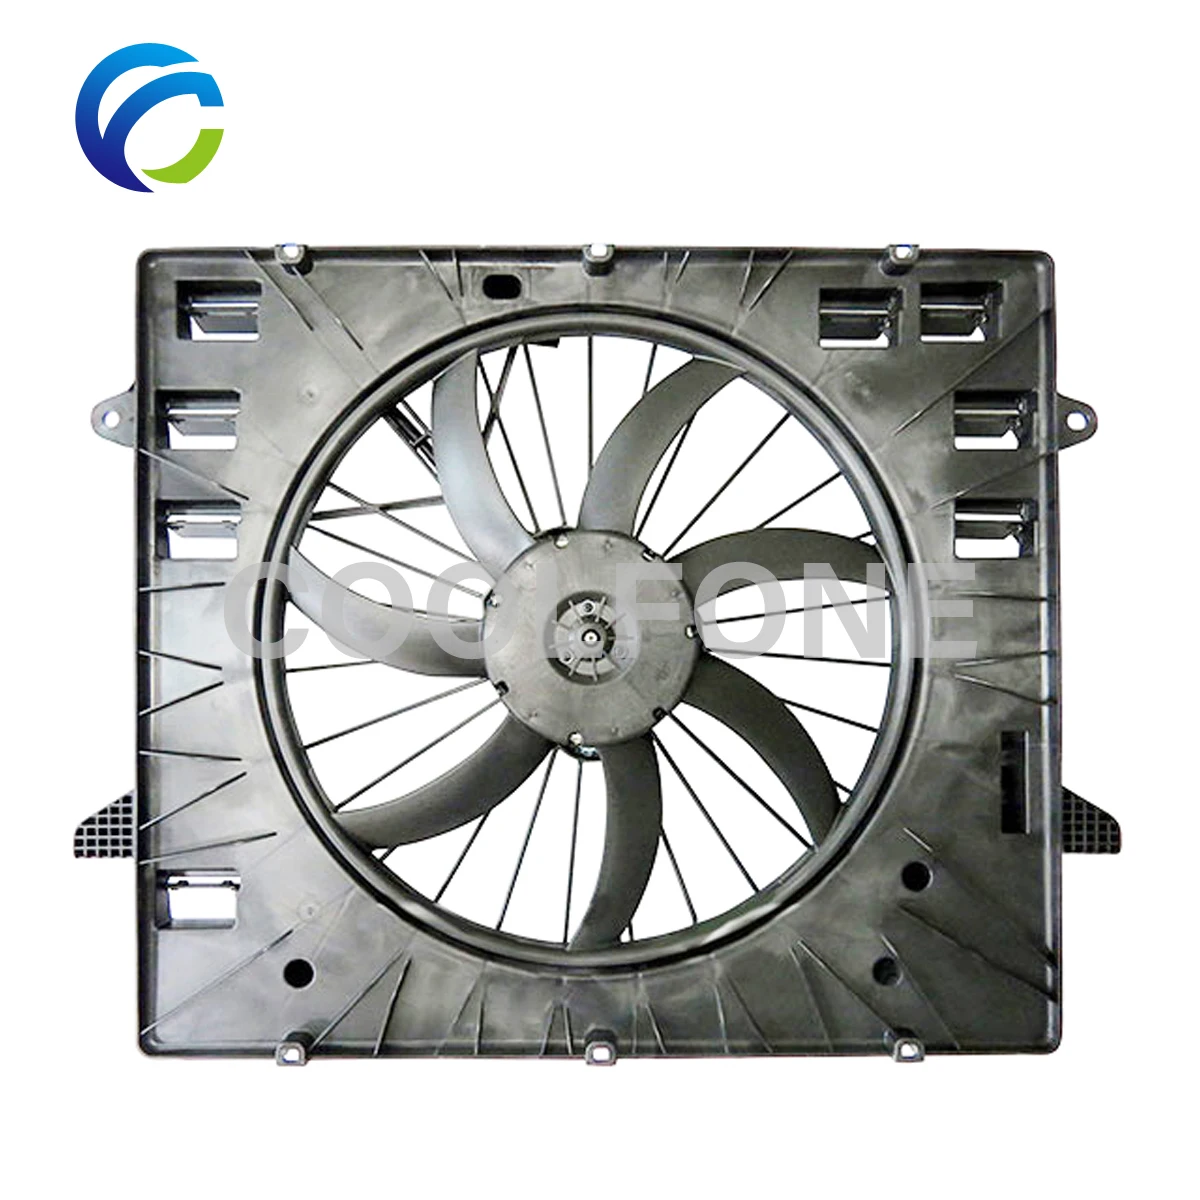 

Radiator Electric Fan for GM BUICK ENCLAVE Chevrolet Traverse 2018 2019 2020 GM3115313 84725046 84199038